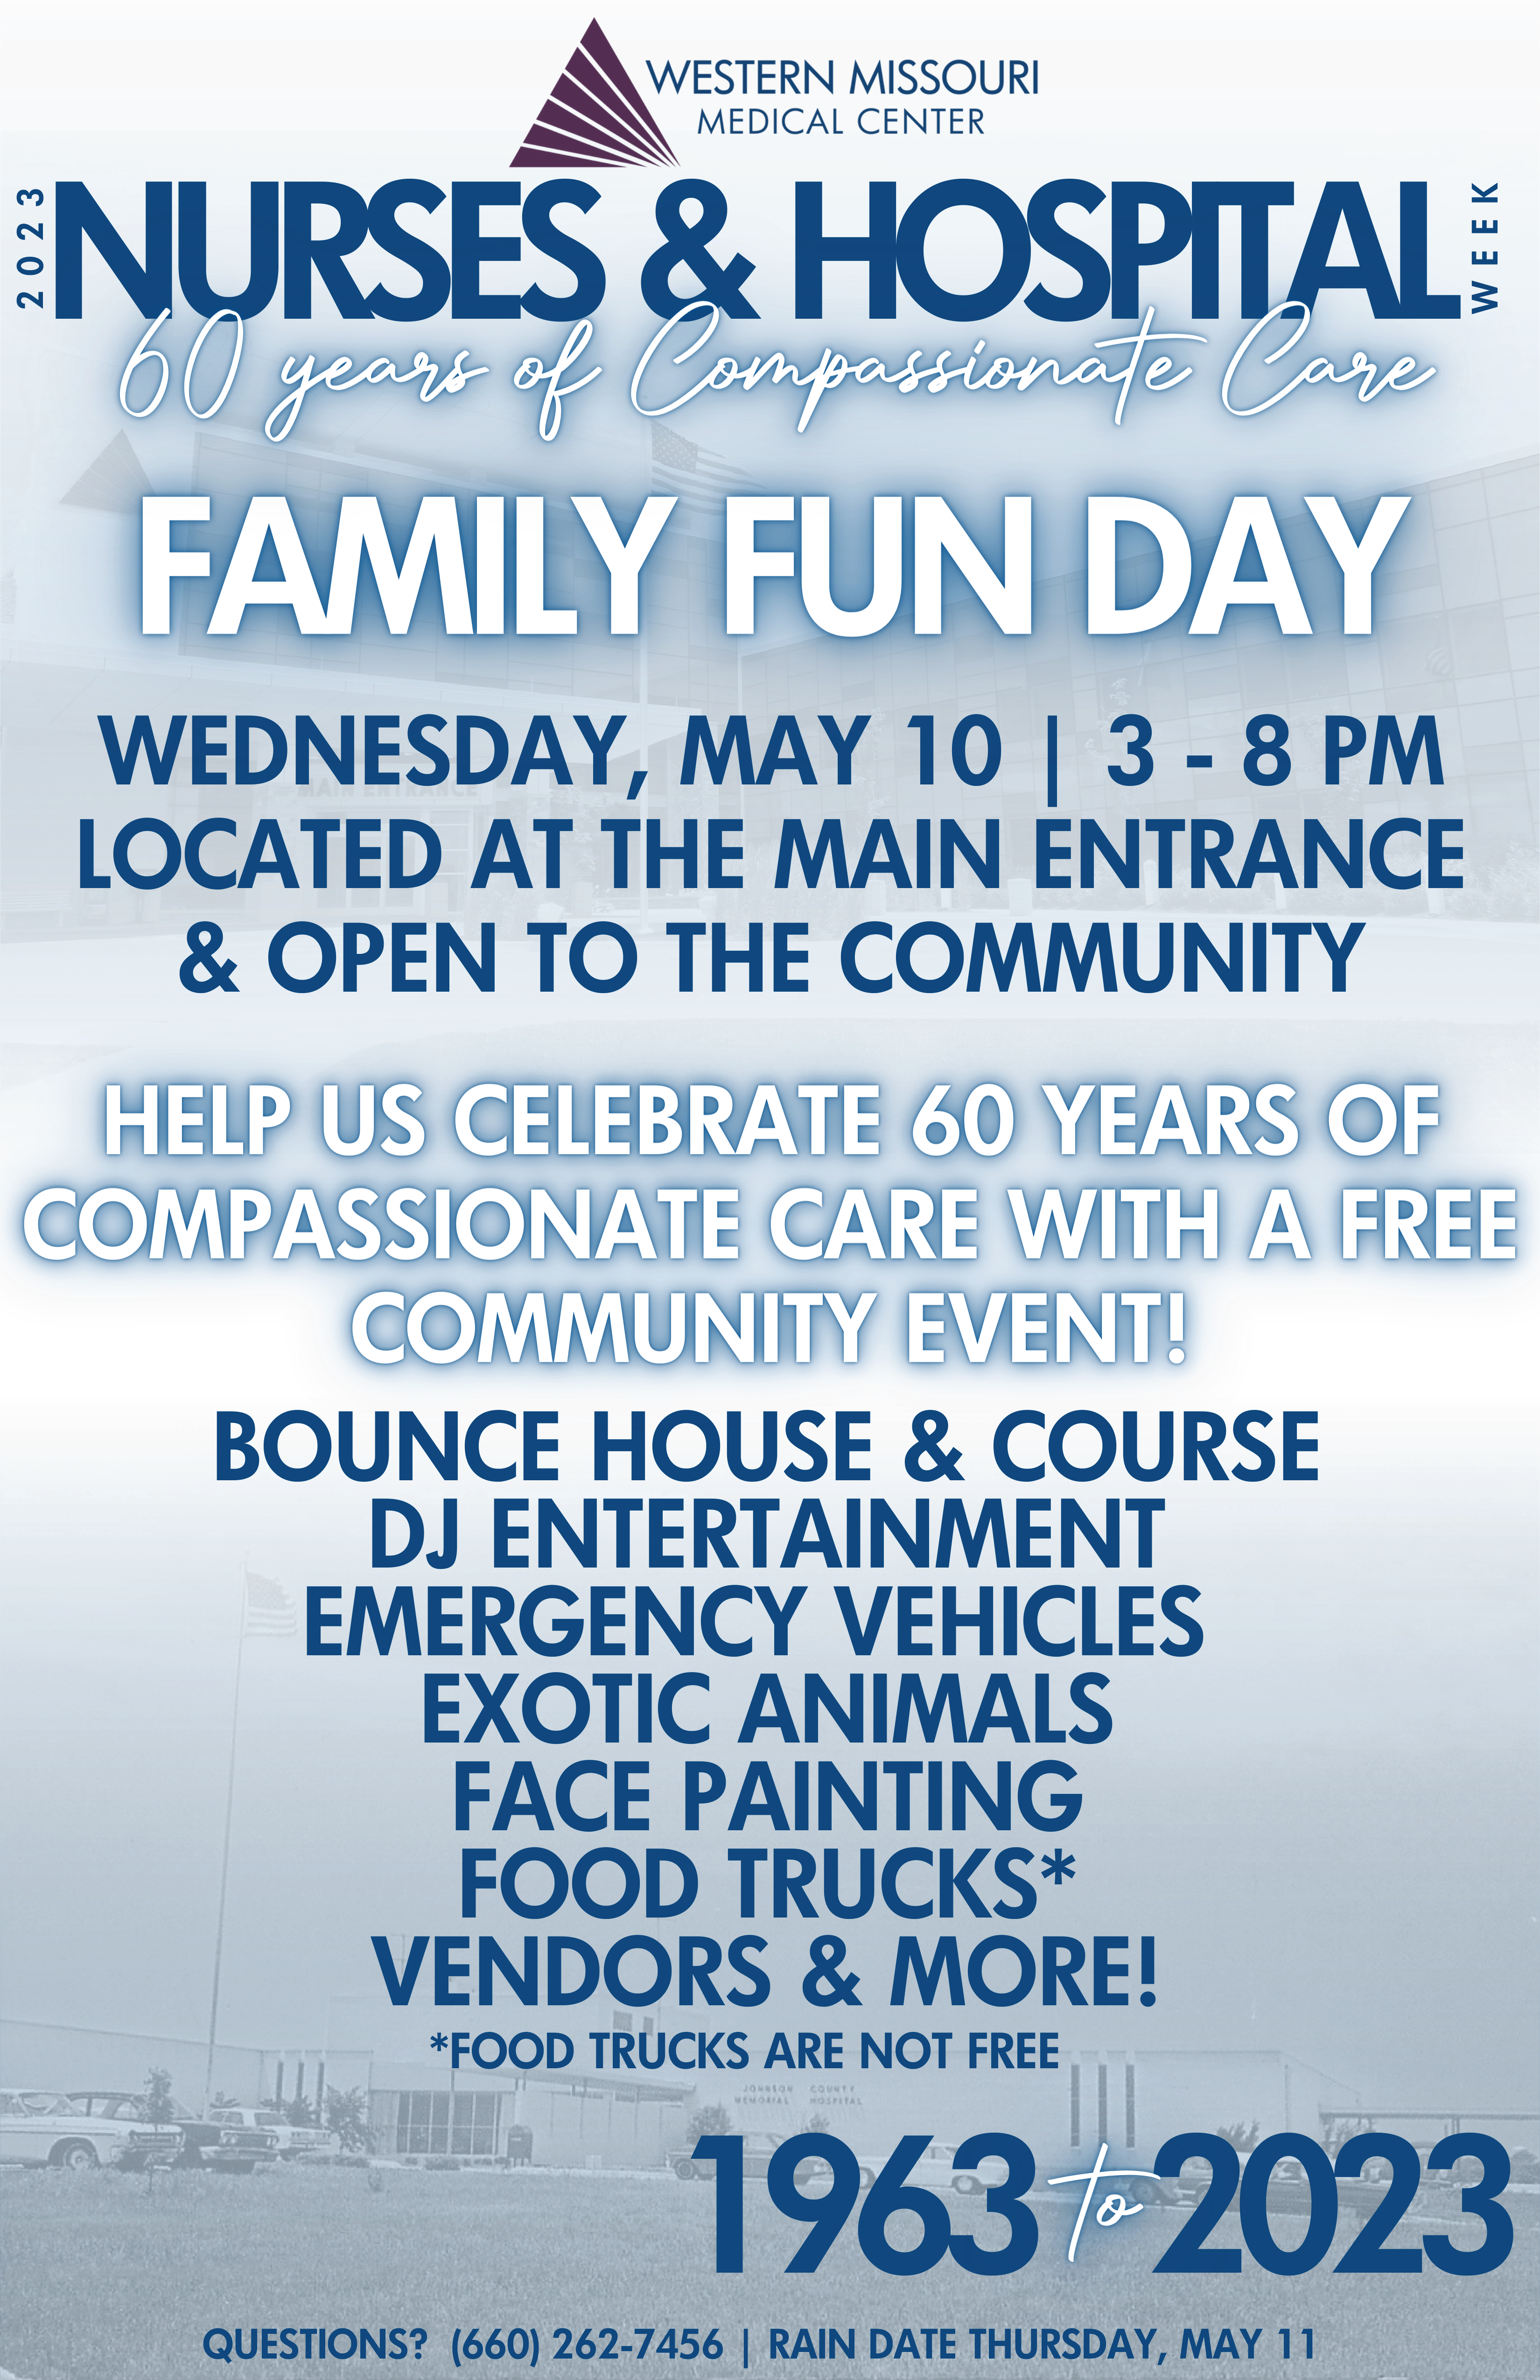 Celebrate Nurses & Hospital Week with us during our 2023 Family Fun Day! This FREE community event will take place on Wednesday, May 10 from 3-8 p.m. at the main entrance of Western Missouri Medical Center.
They'll be celebrating 60 years of compassionate care with food trucks, vendors like WILS, and activities for all ages, including a bounce house, inflatable course, music, face painting, exotic animals and emergency vehicles.

Questions about this event? Contact Bailey Eggen at (660) 262-7456 or beggen@wmmc.com for more information. 